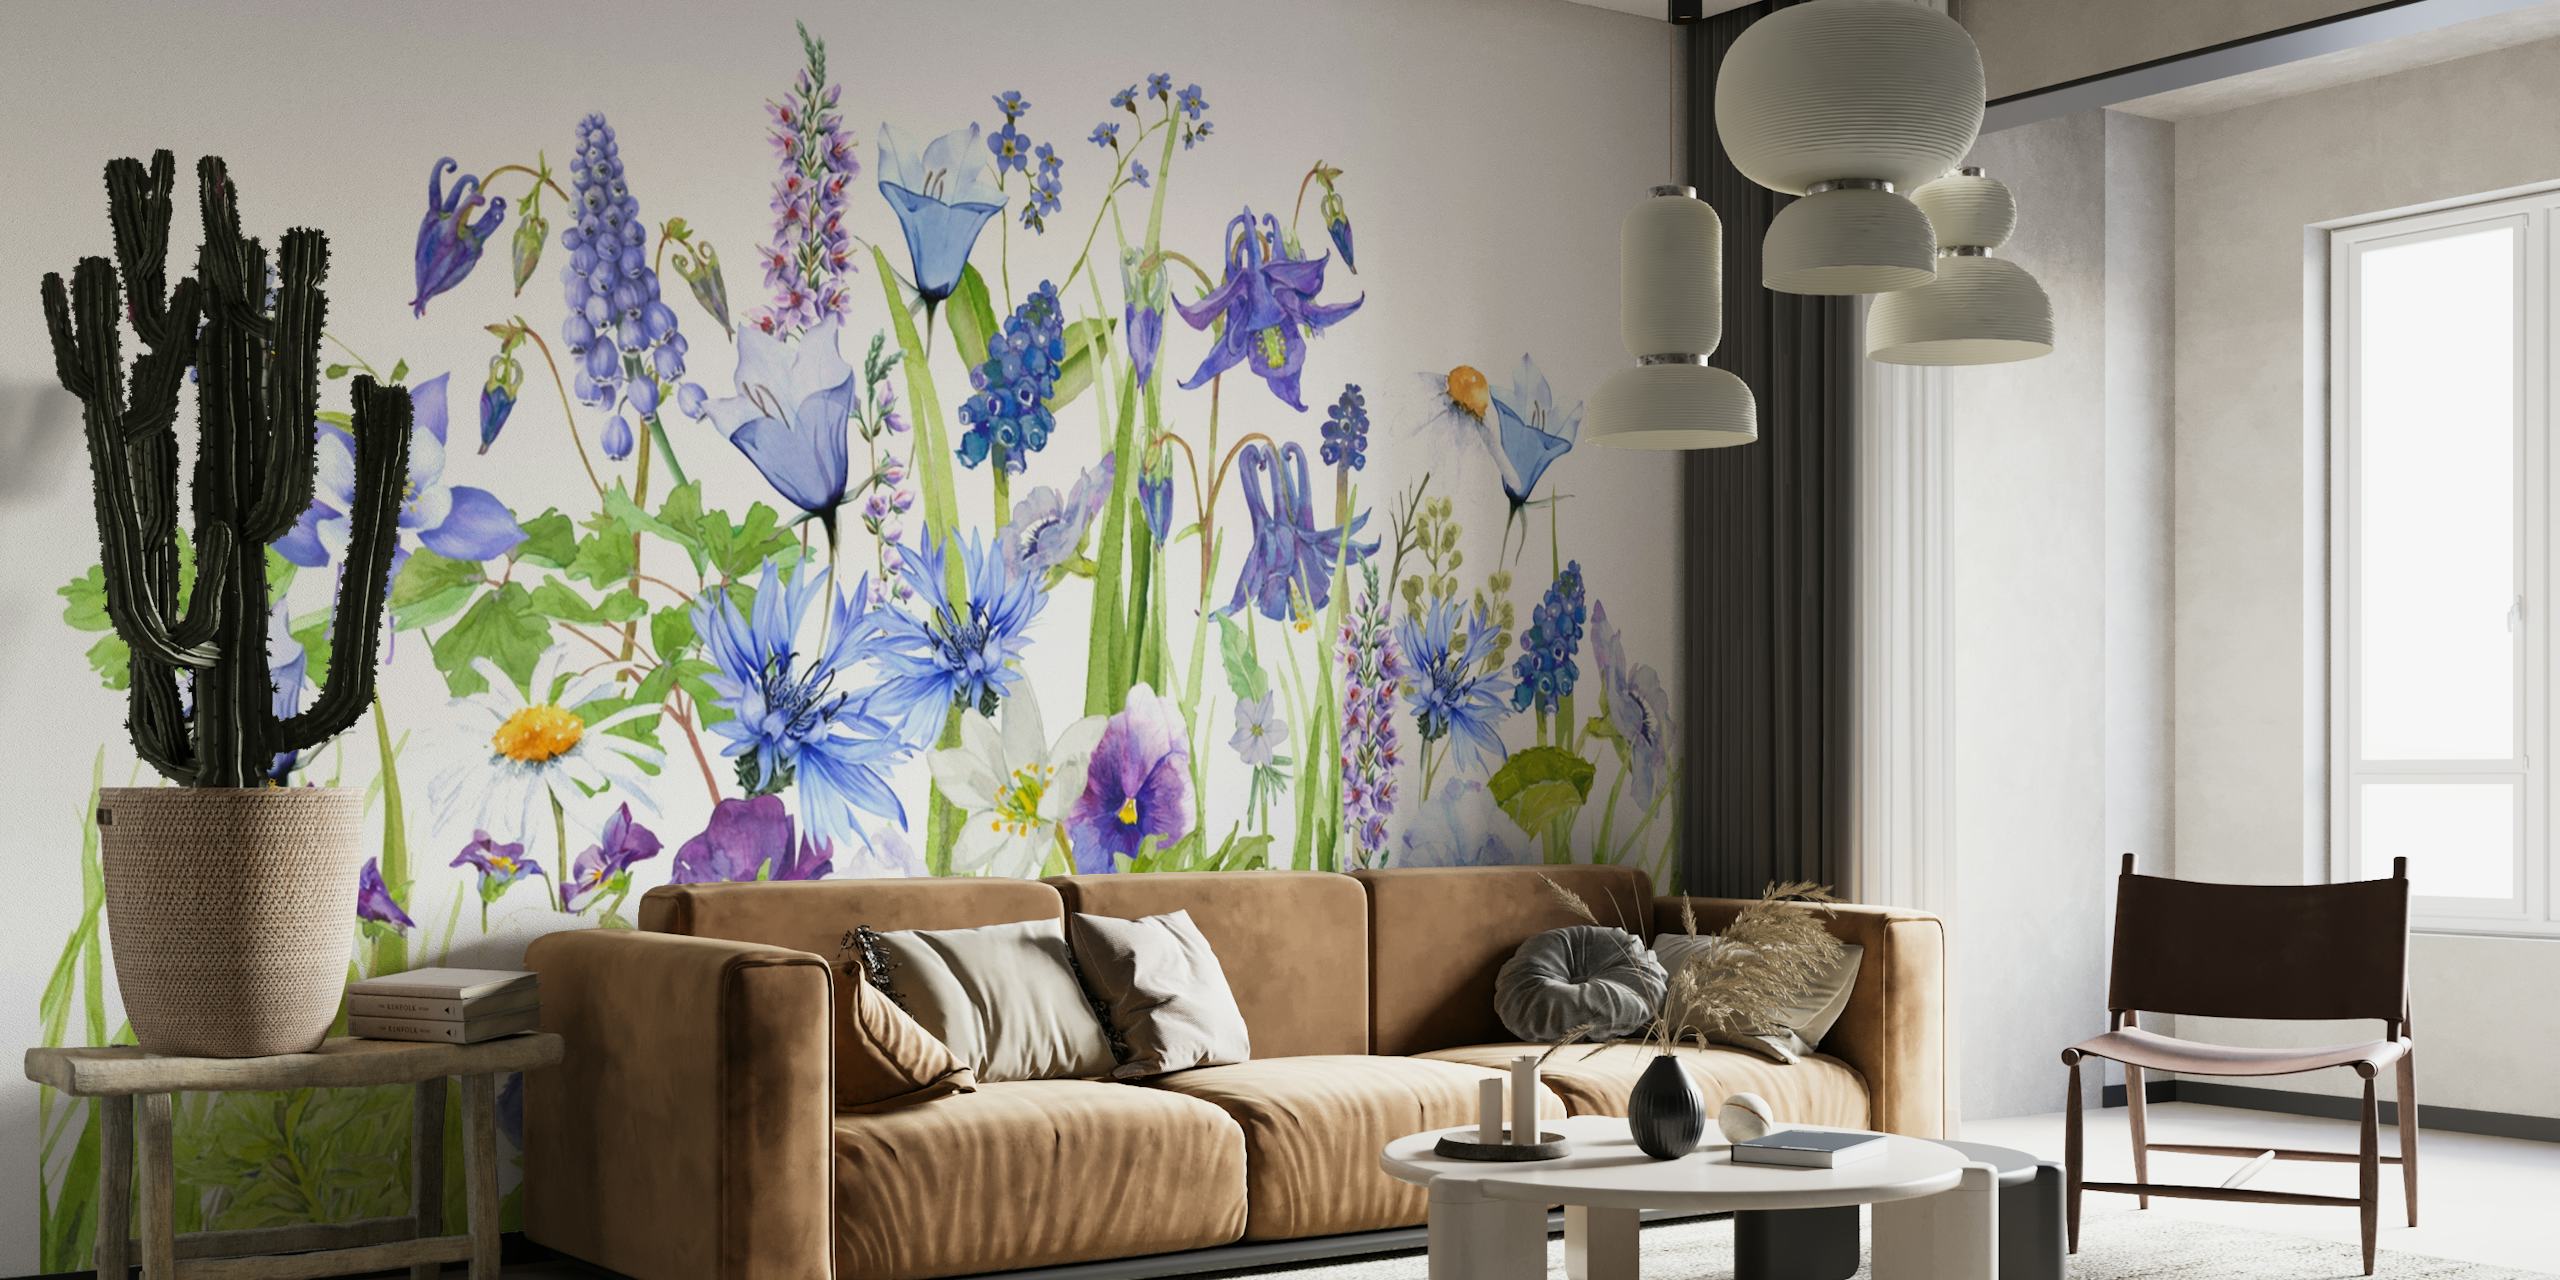 A wall mural depicting a variety of wildflowers in shades of blue and green, creating an immersive summer meadow scene.